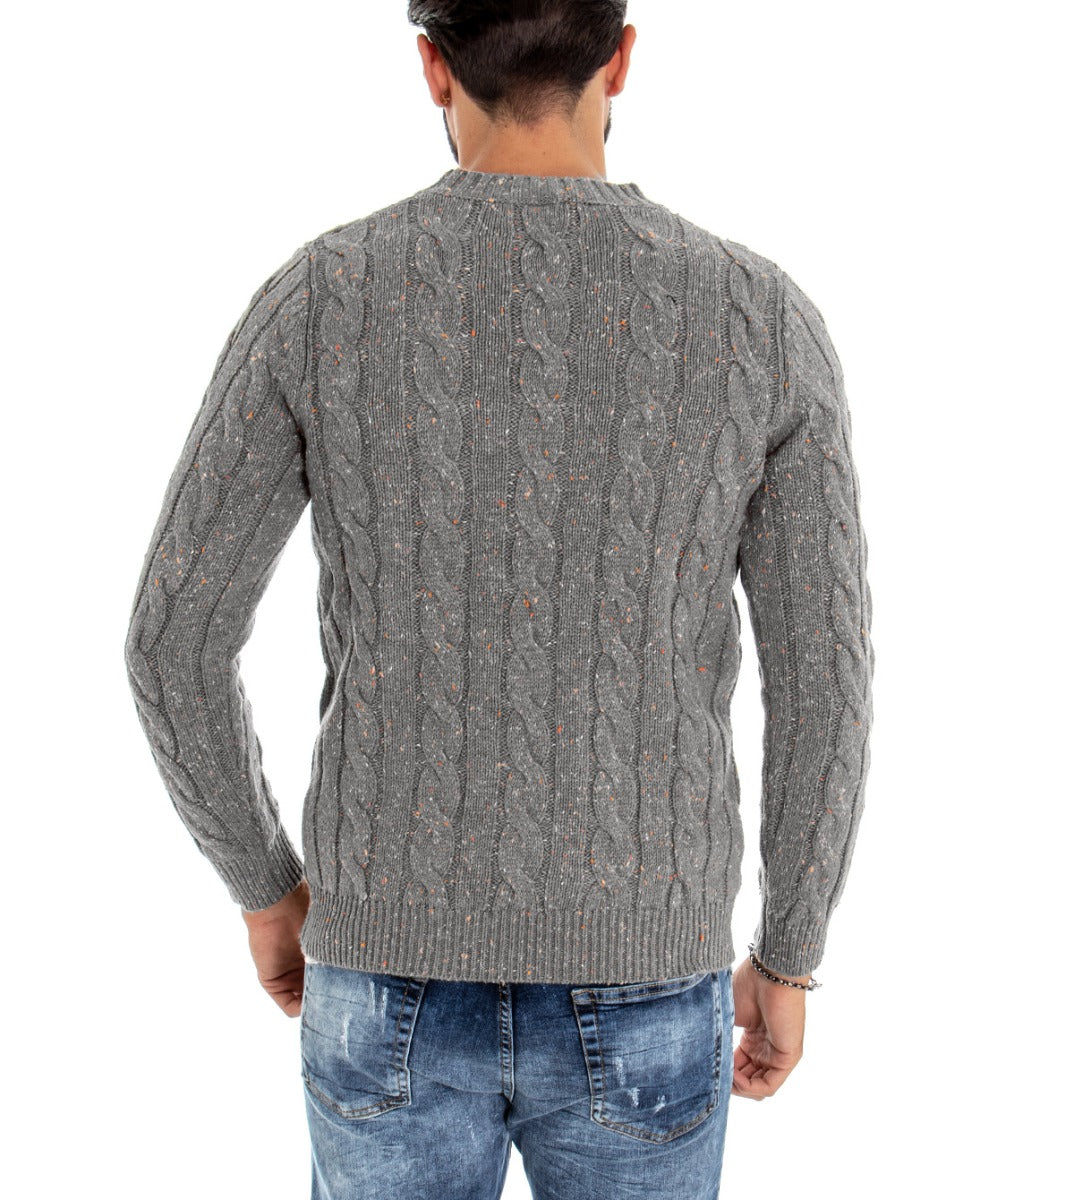 Men's Sweater with Mélange Braid Texture Crew-neck Sweater Light Gray Pullover GIOSAL